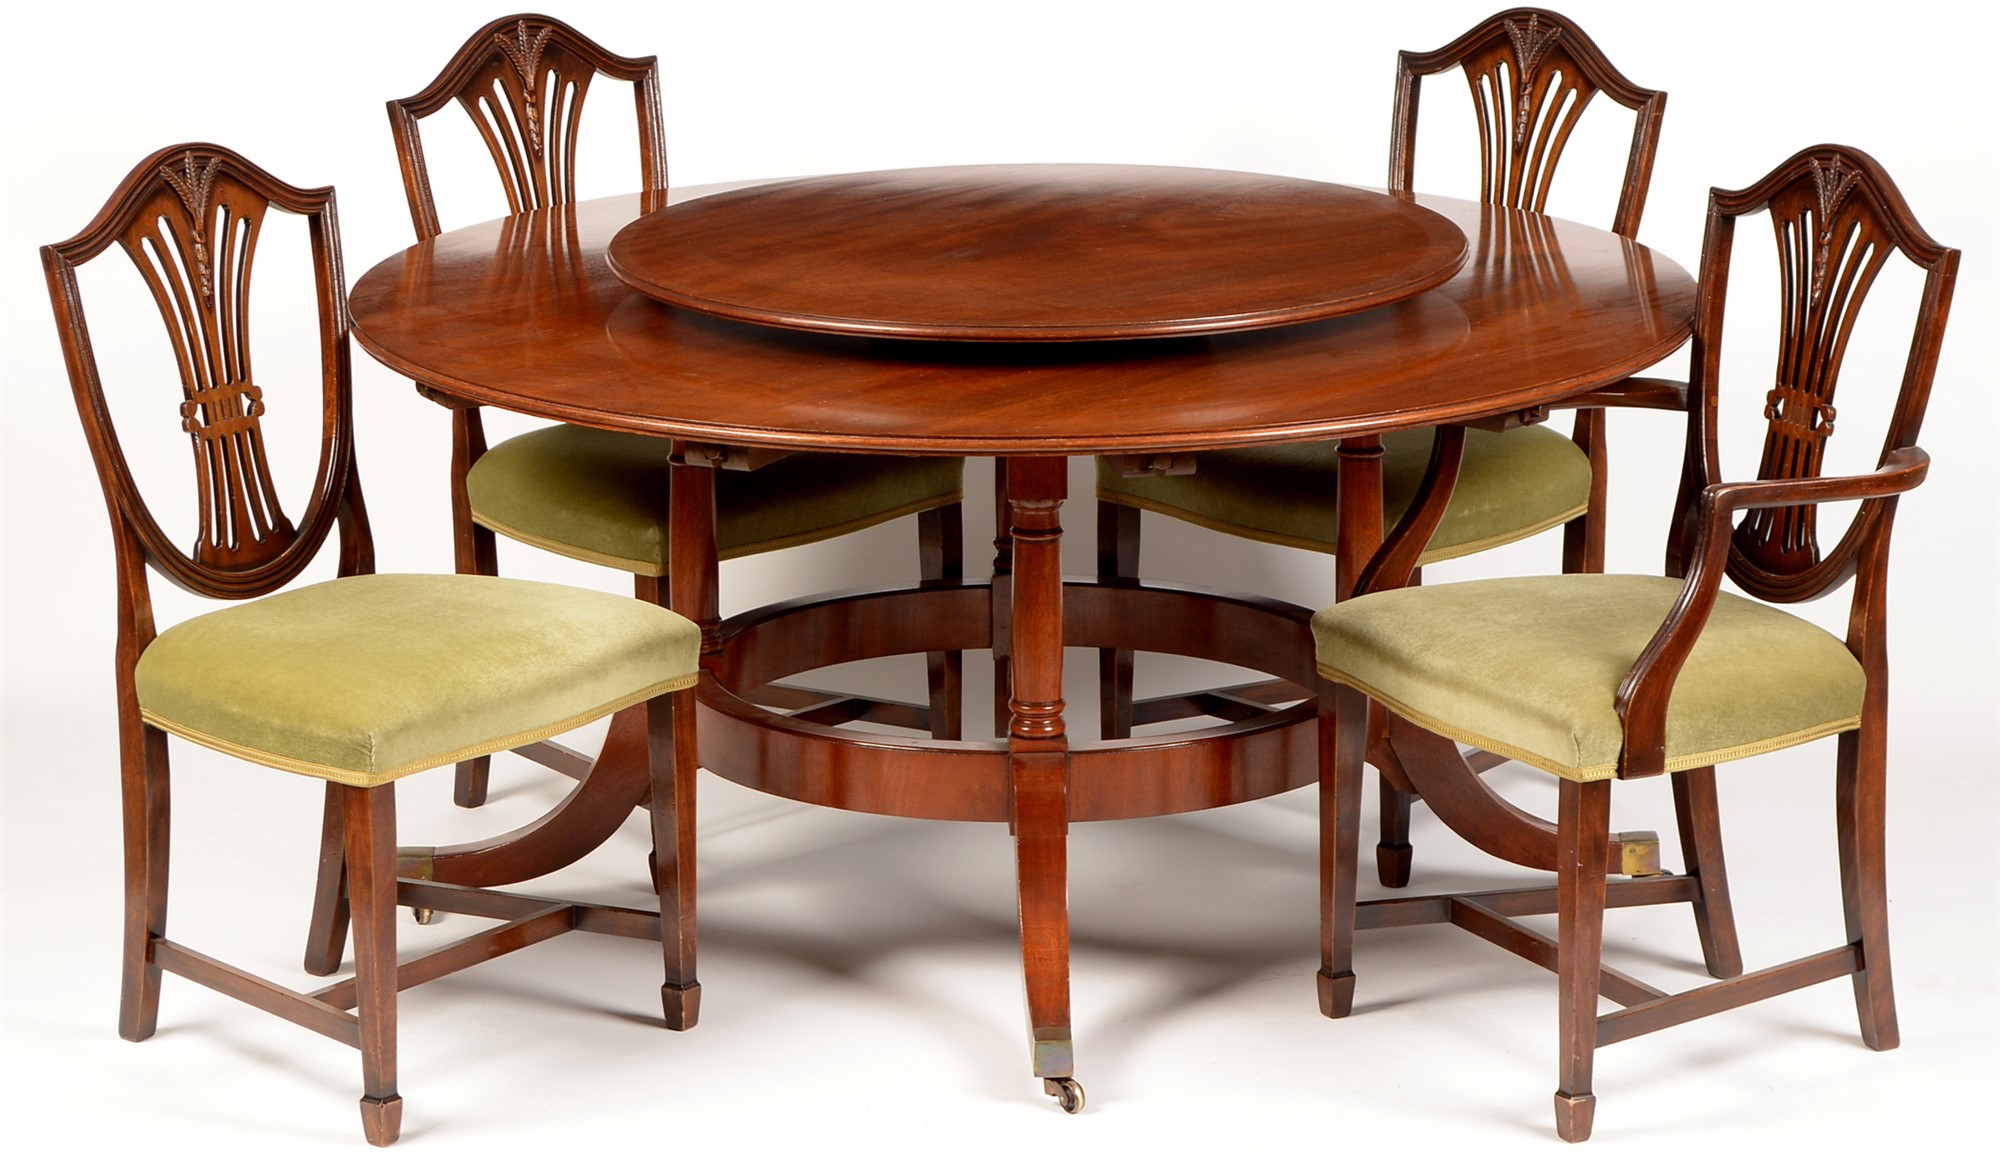 Chapmans 'Siesta' dining table., cabinet and twelve matching chairs - Image 2 of 2